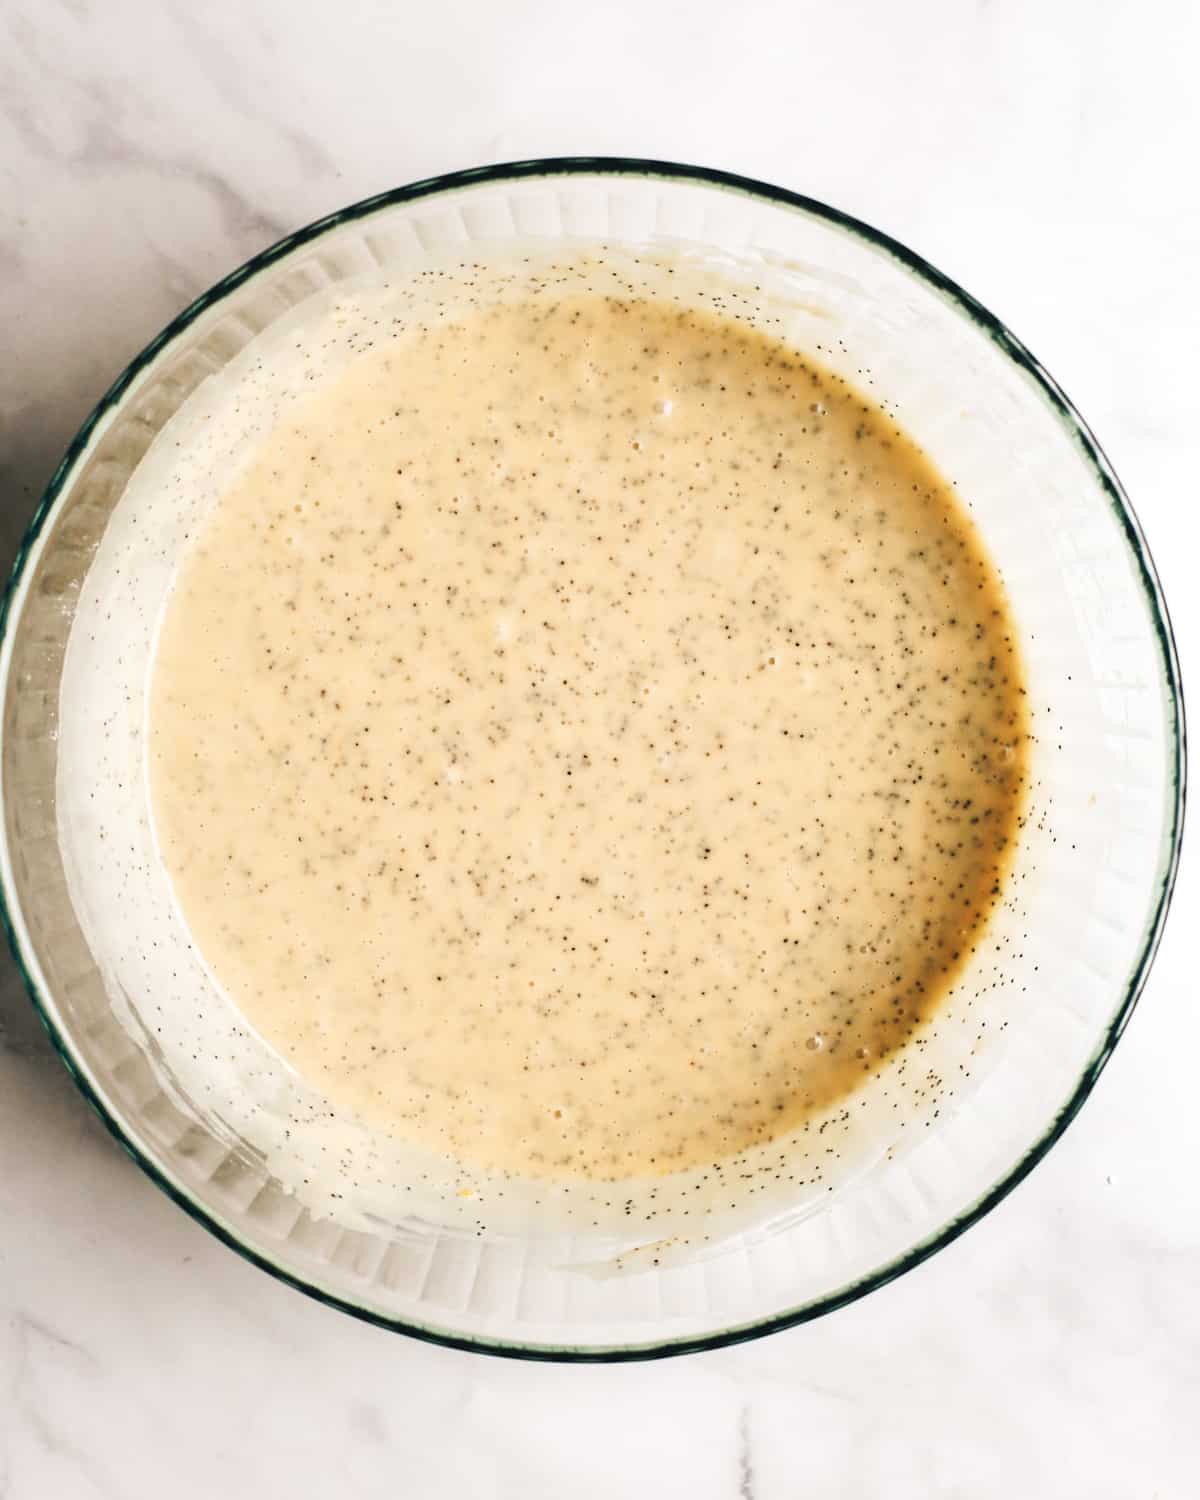 finished poppy seed cake batter in a bowl